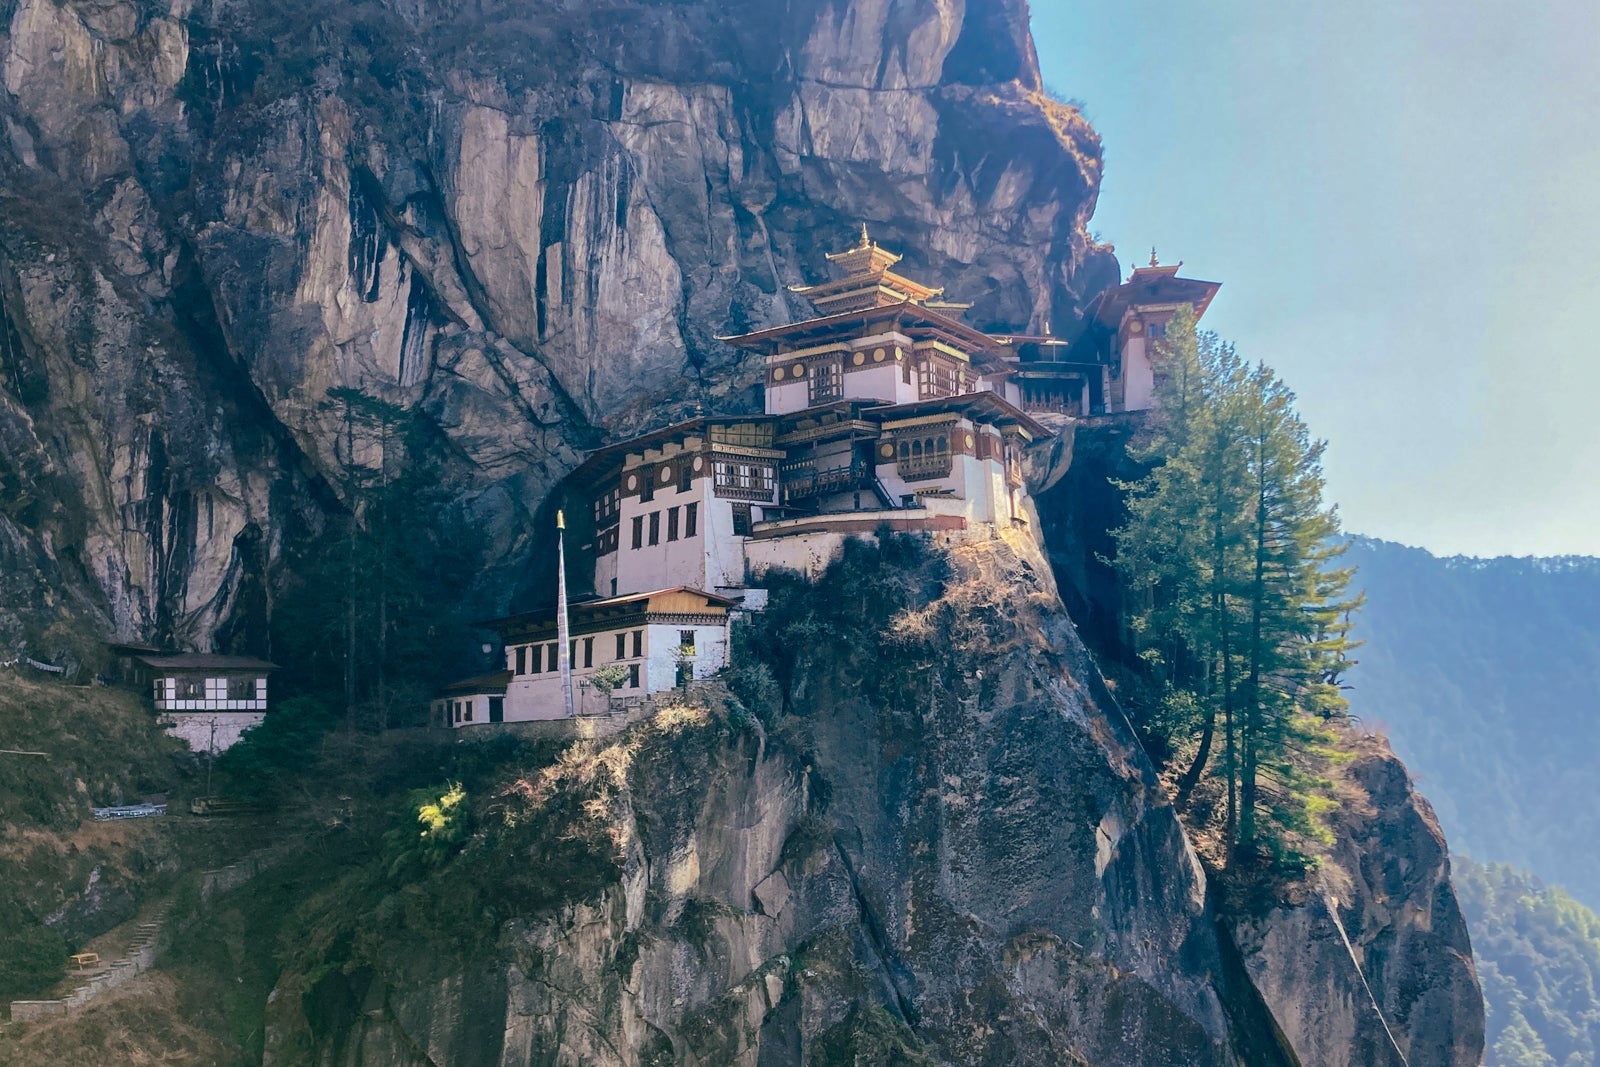 The Tiger's Nest in Bhutan: a small monastery built into the side of a mountain